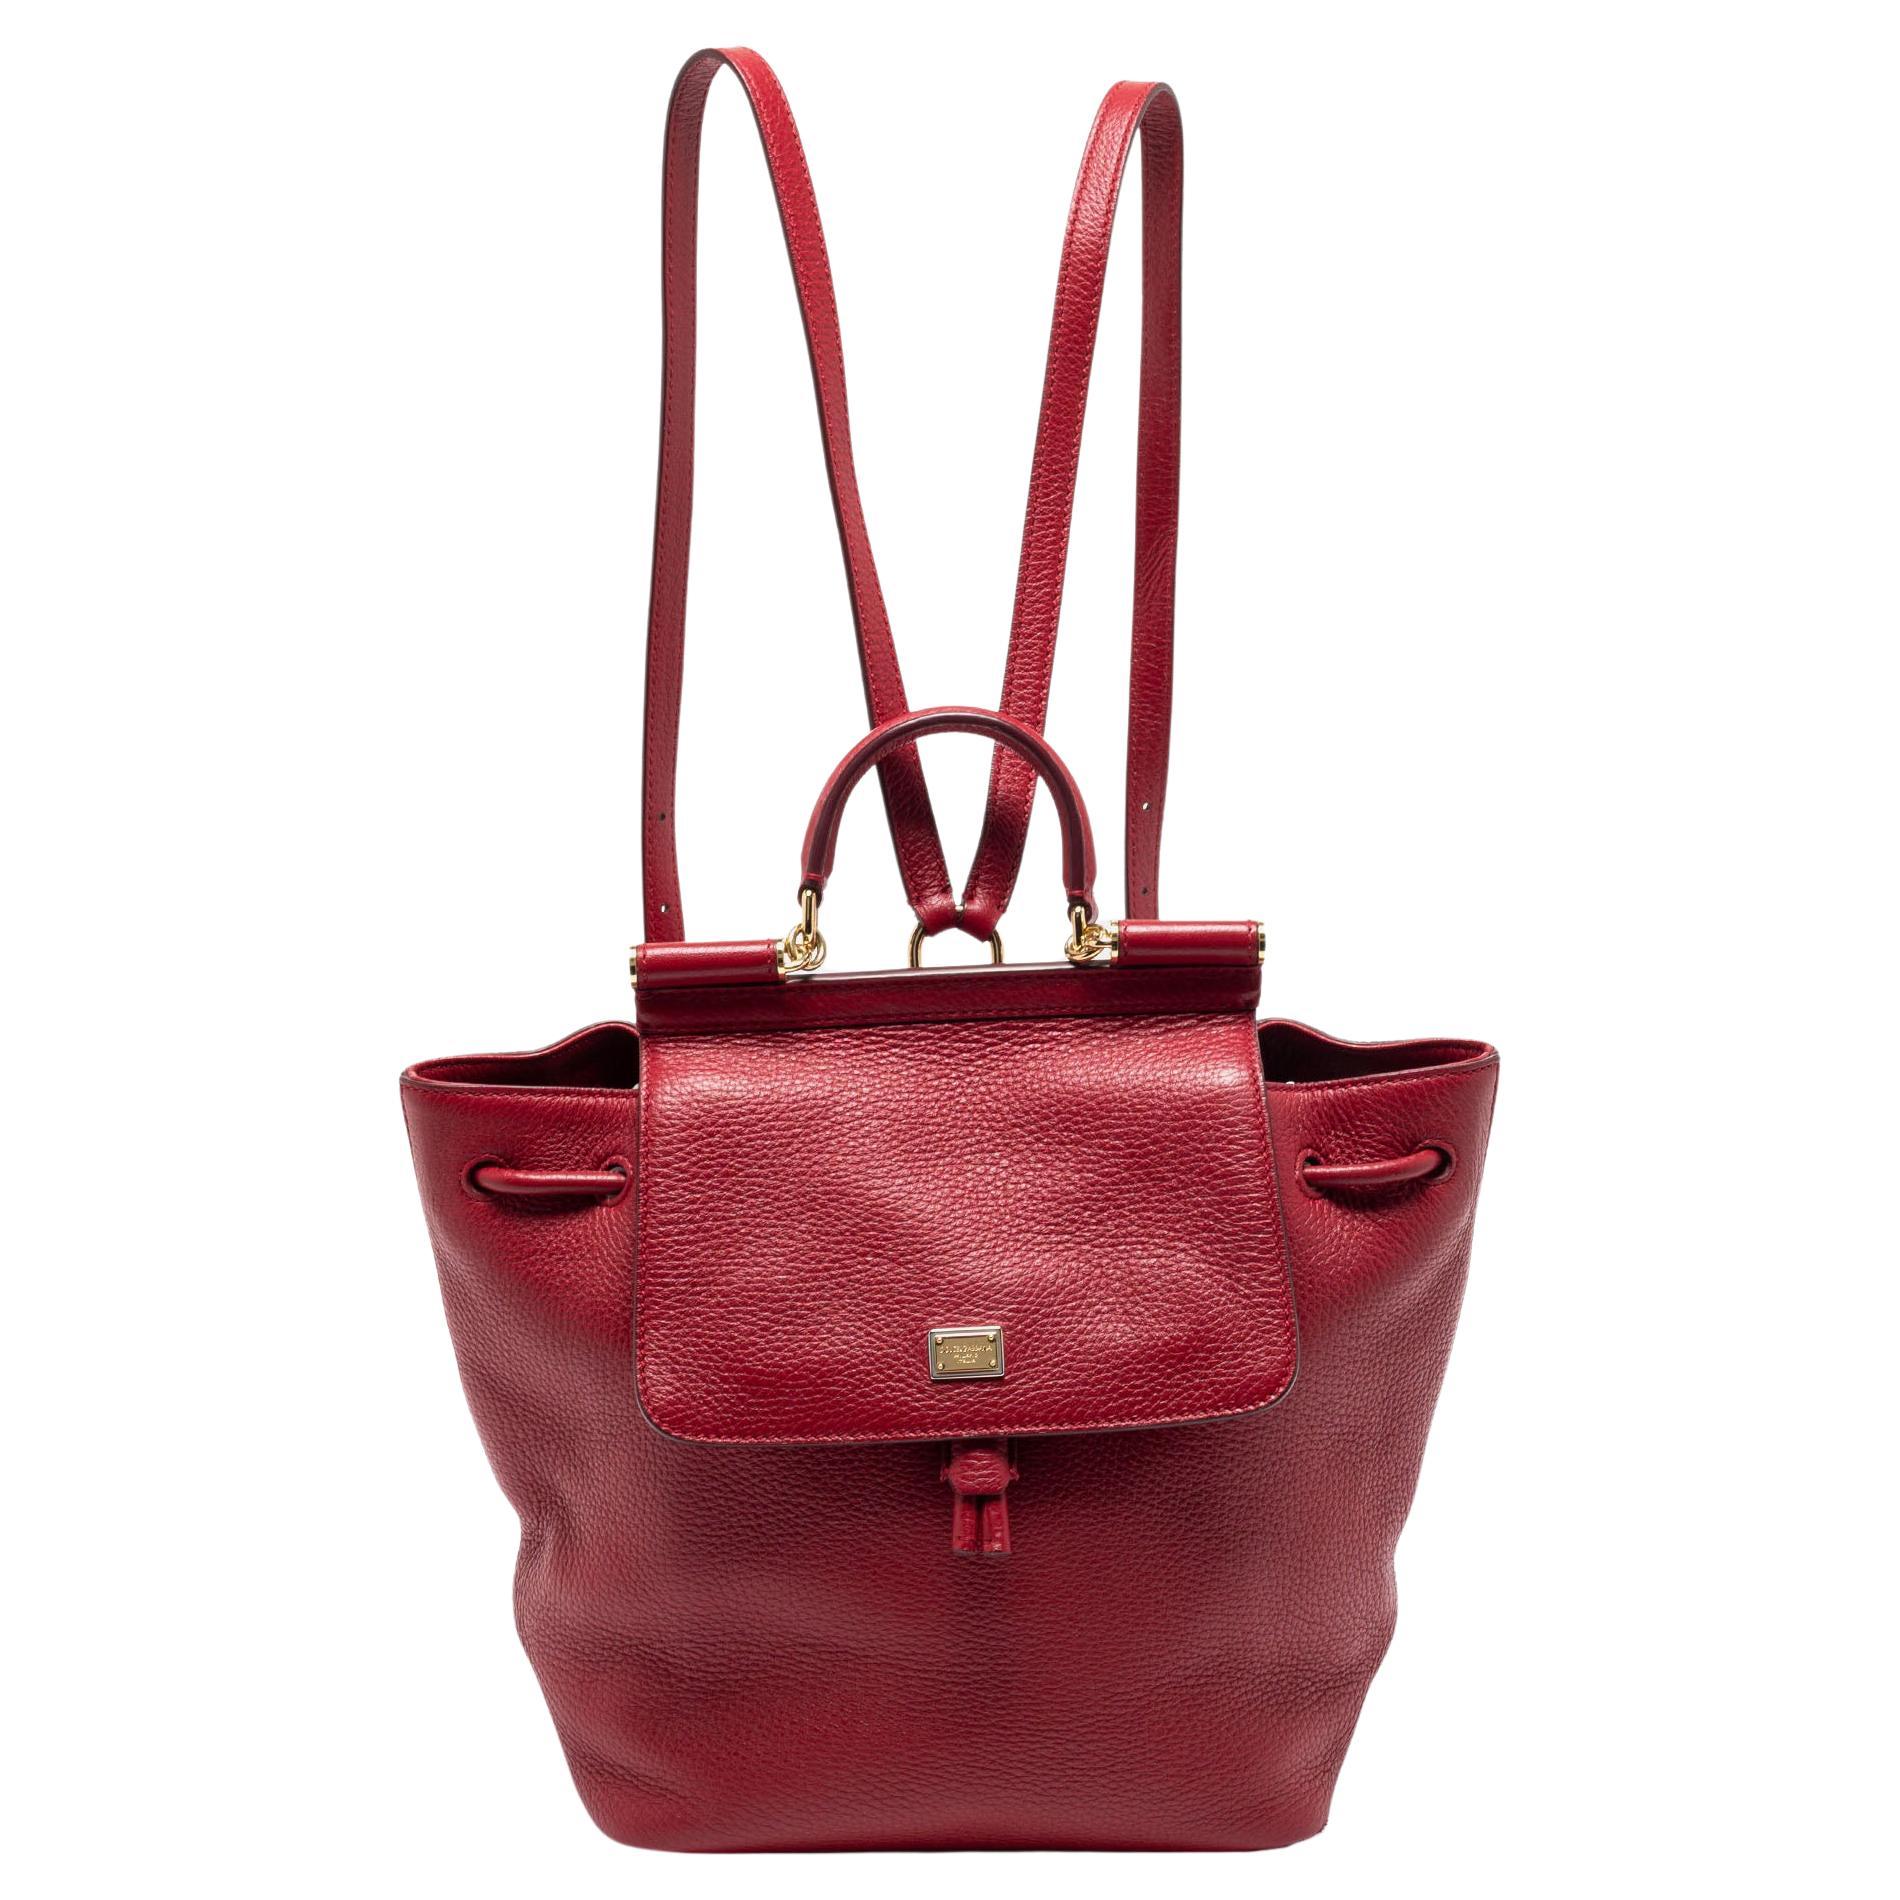 Dolce & Gabbana Red Leather Sicily Backpack